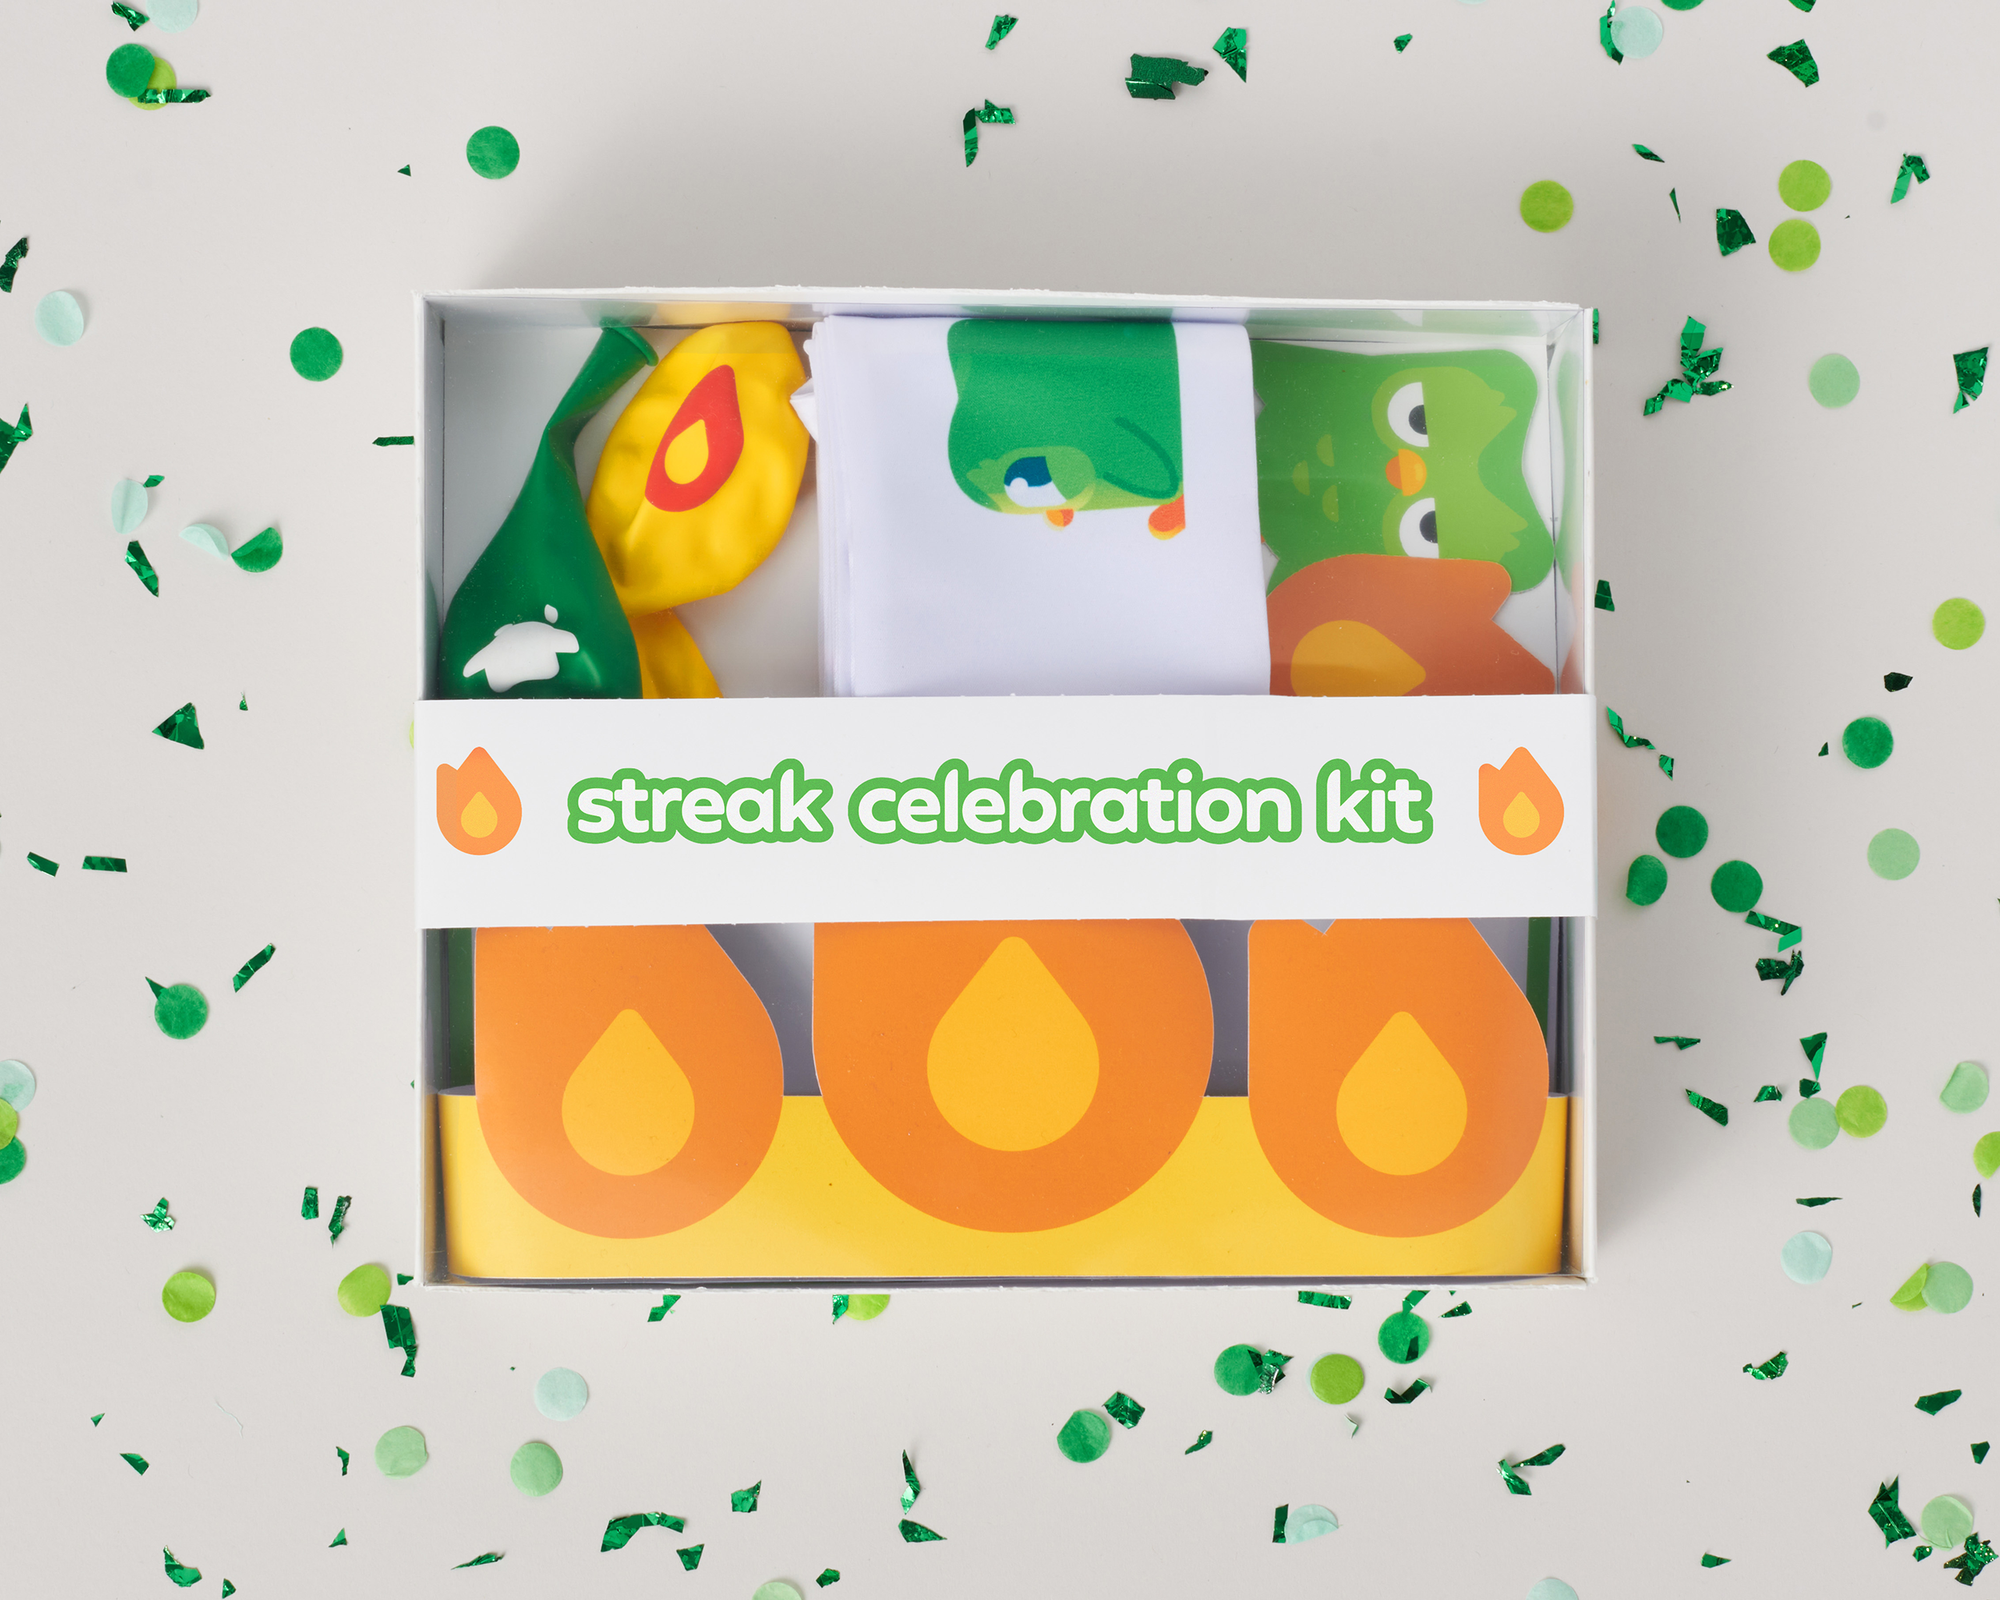 A picture of the Duolingo Streak Celebration Kit. A box with party items, like balloons, a sash, and a Duo banner, are in a box surrounded by confetti